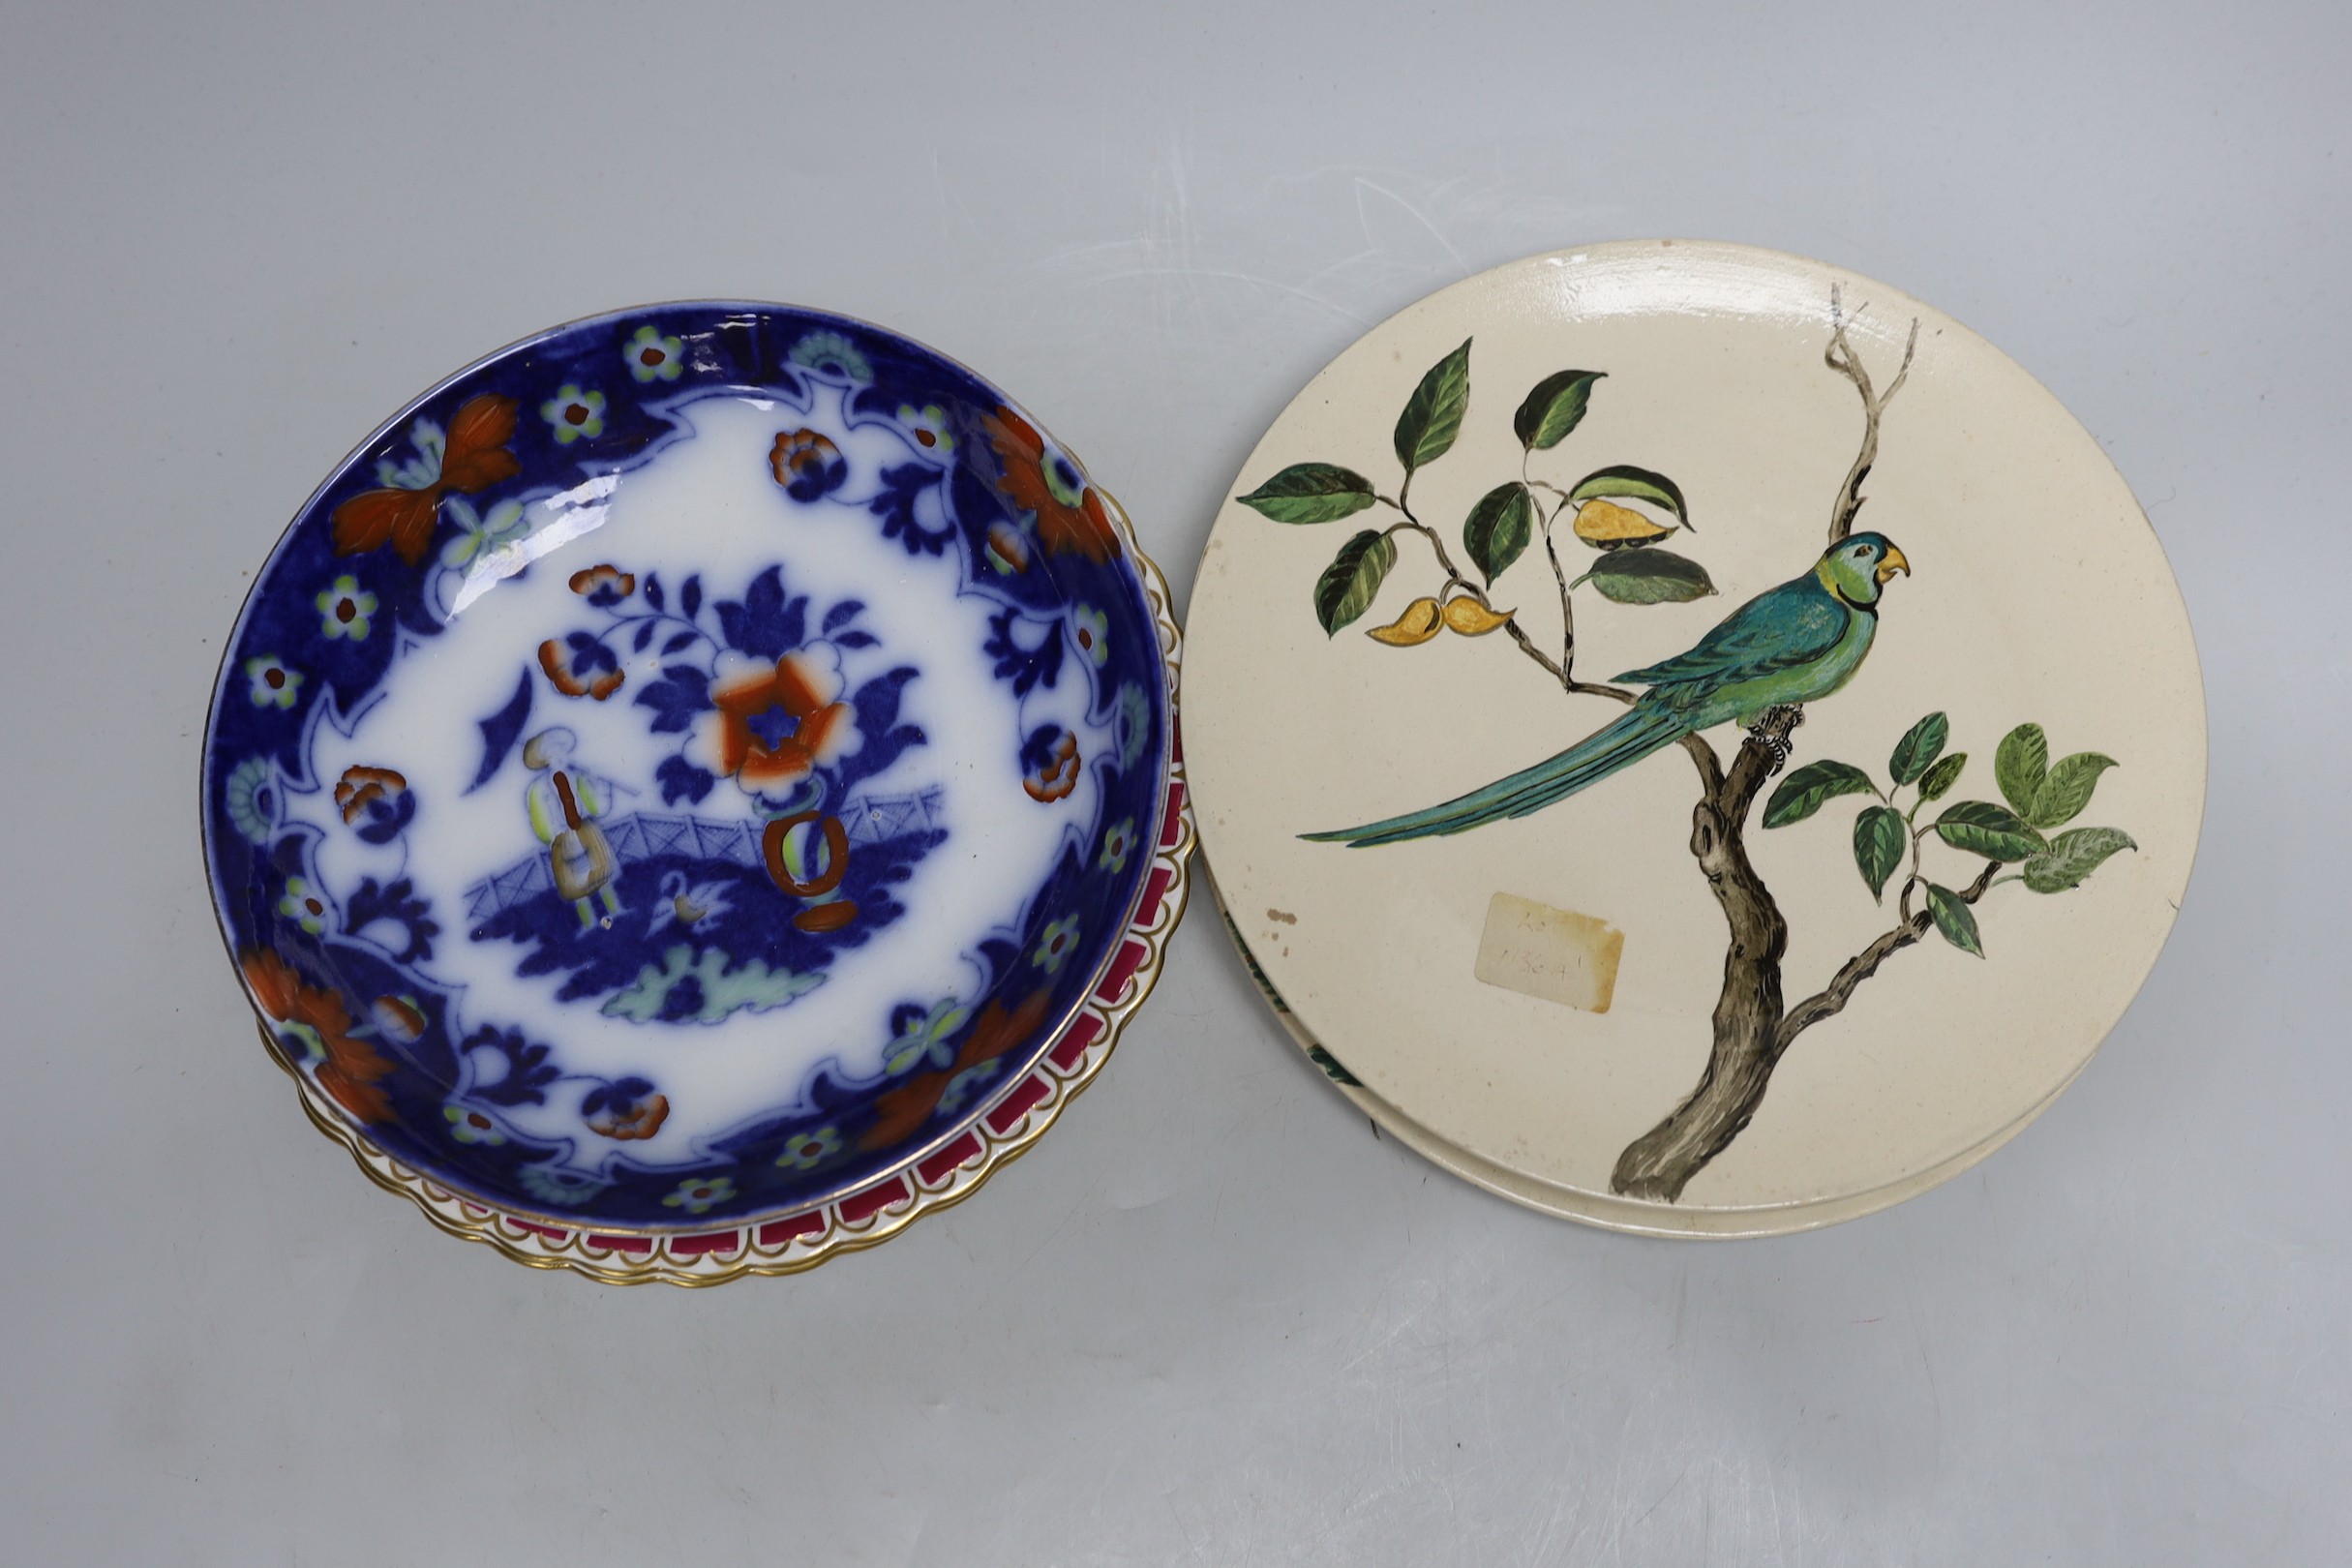 A pair of Doulton plates, a pair of floral plates, a Victorian nursery plate and a large flow blue cup and saucer